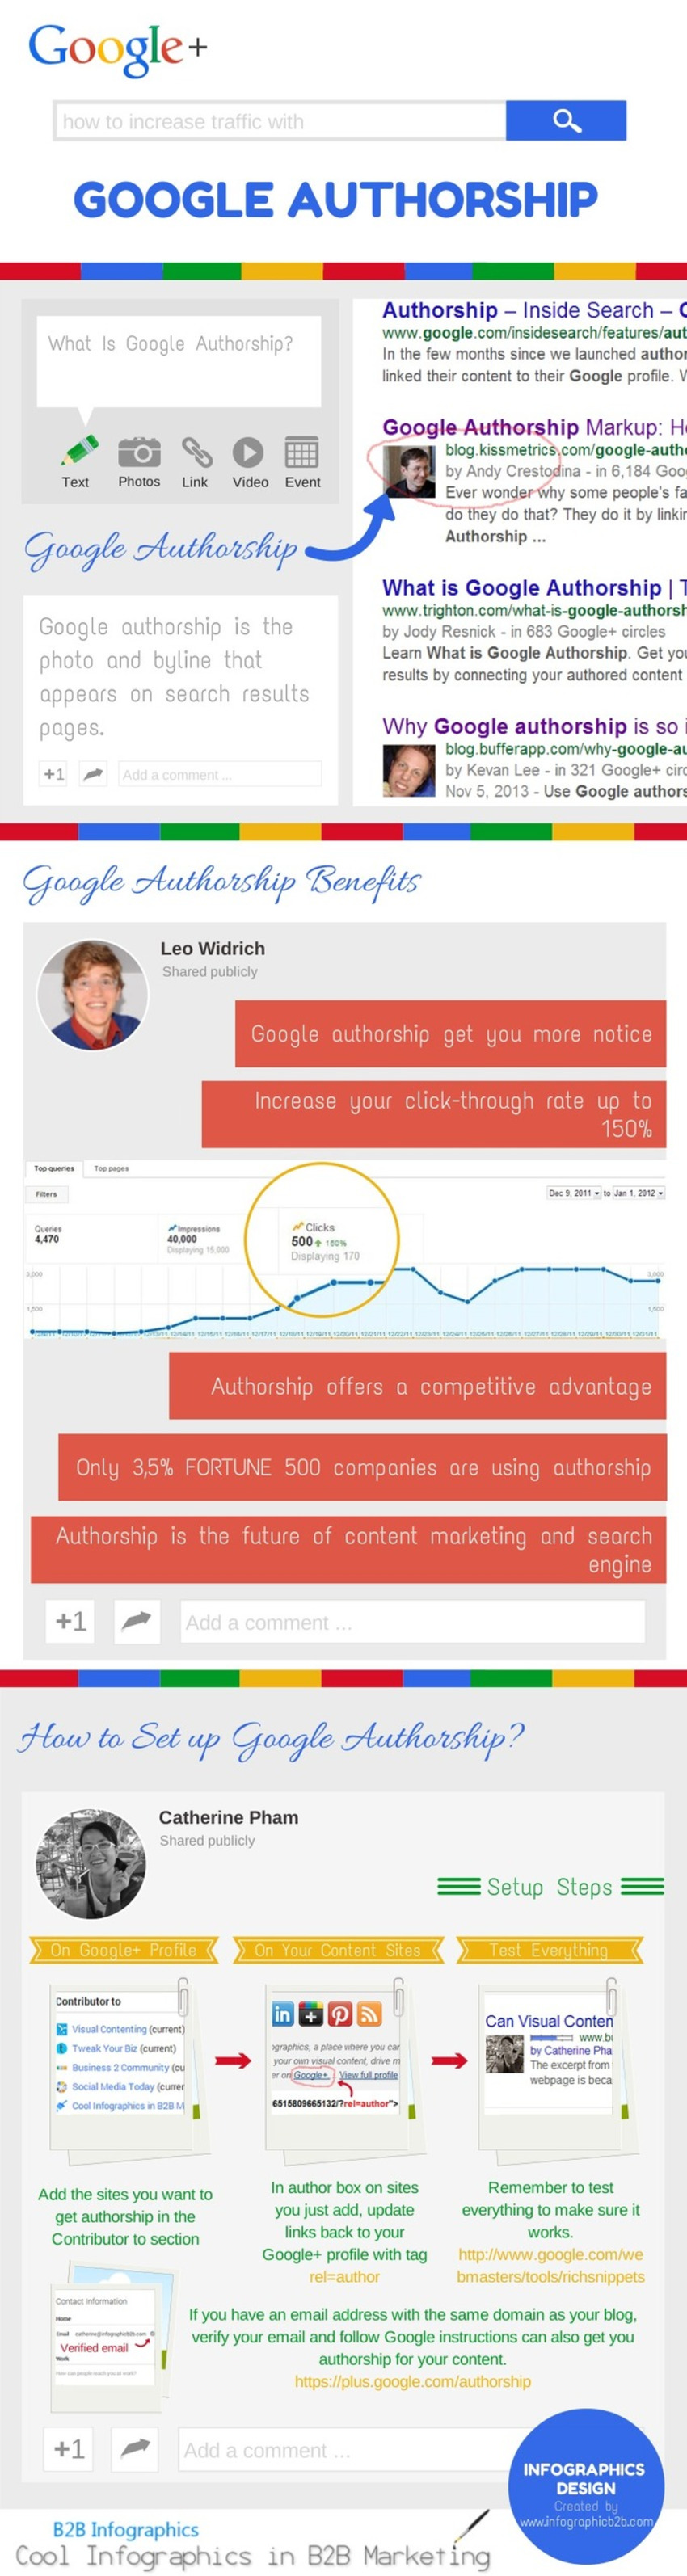 How to Increase Traffic with Google Authorship [Infographic] - B2B Infographics | #TheMarketingTechAlert | The MarTech Digest | Scoop.it